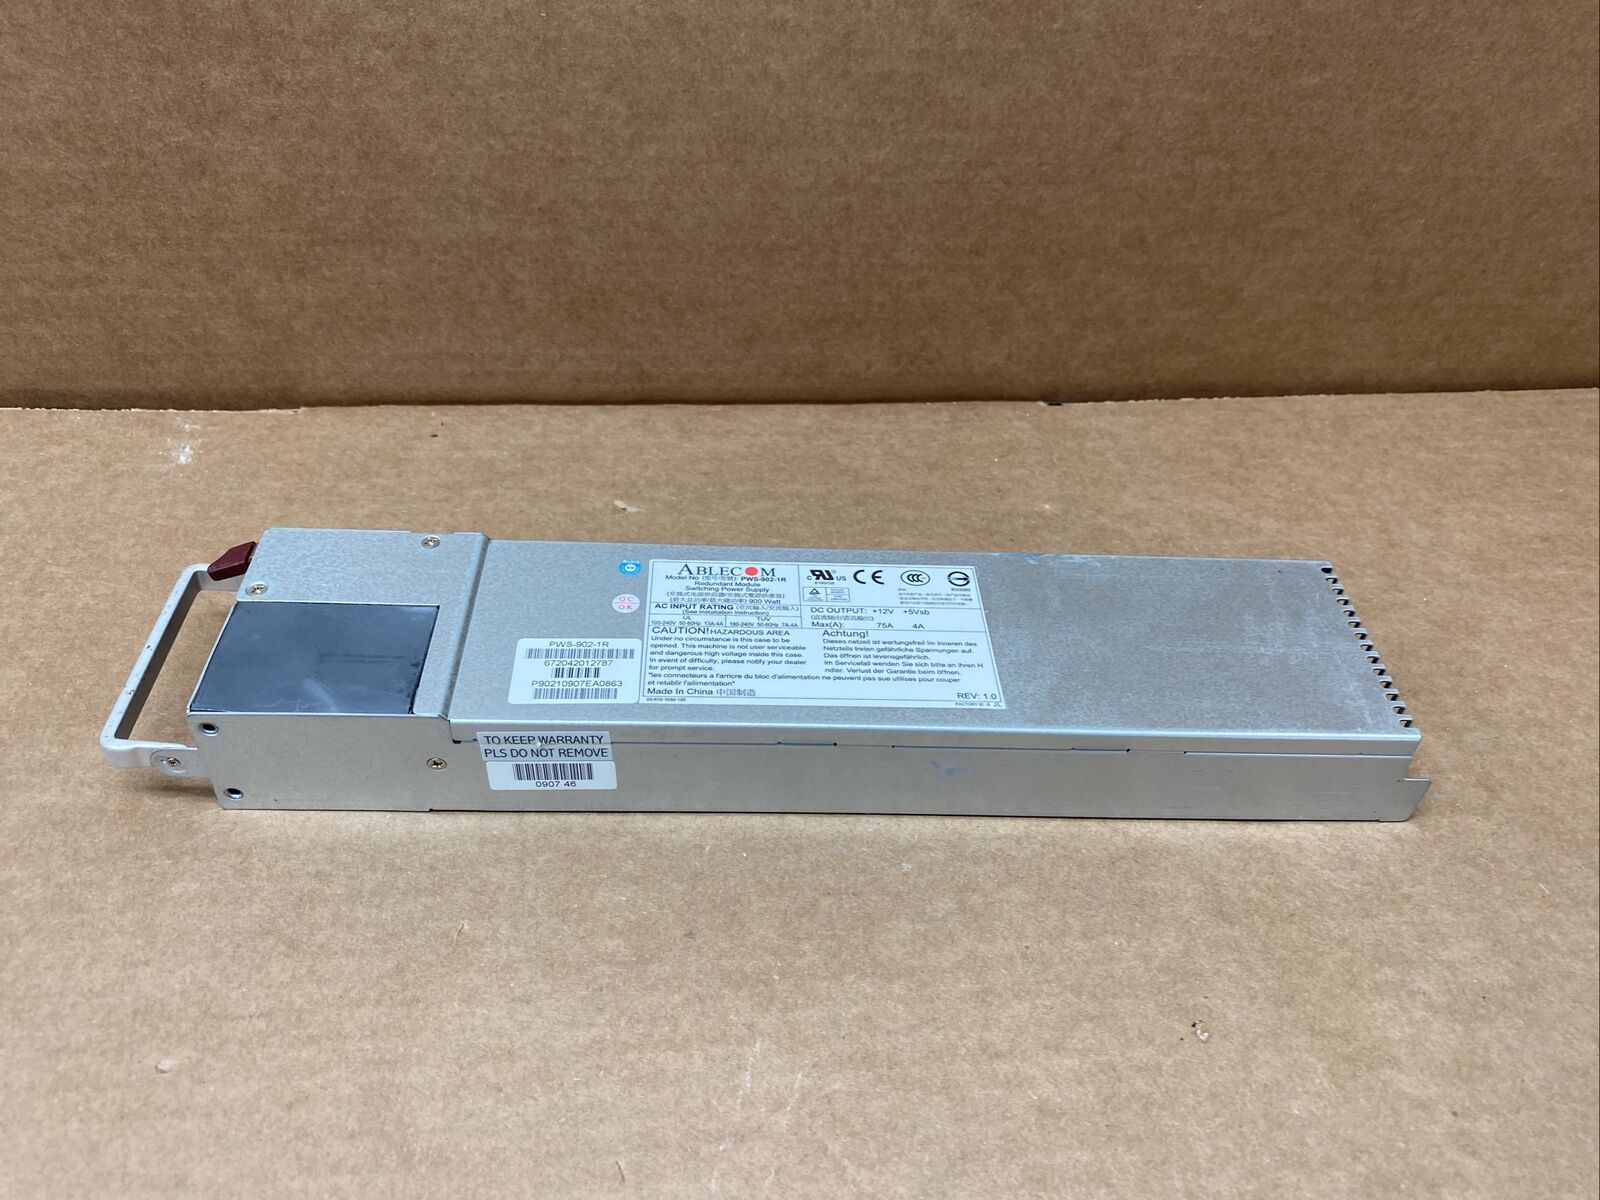 ABLECOM PWS-902-1R 900W 12V Redundant Module Switching Power Supply